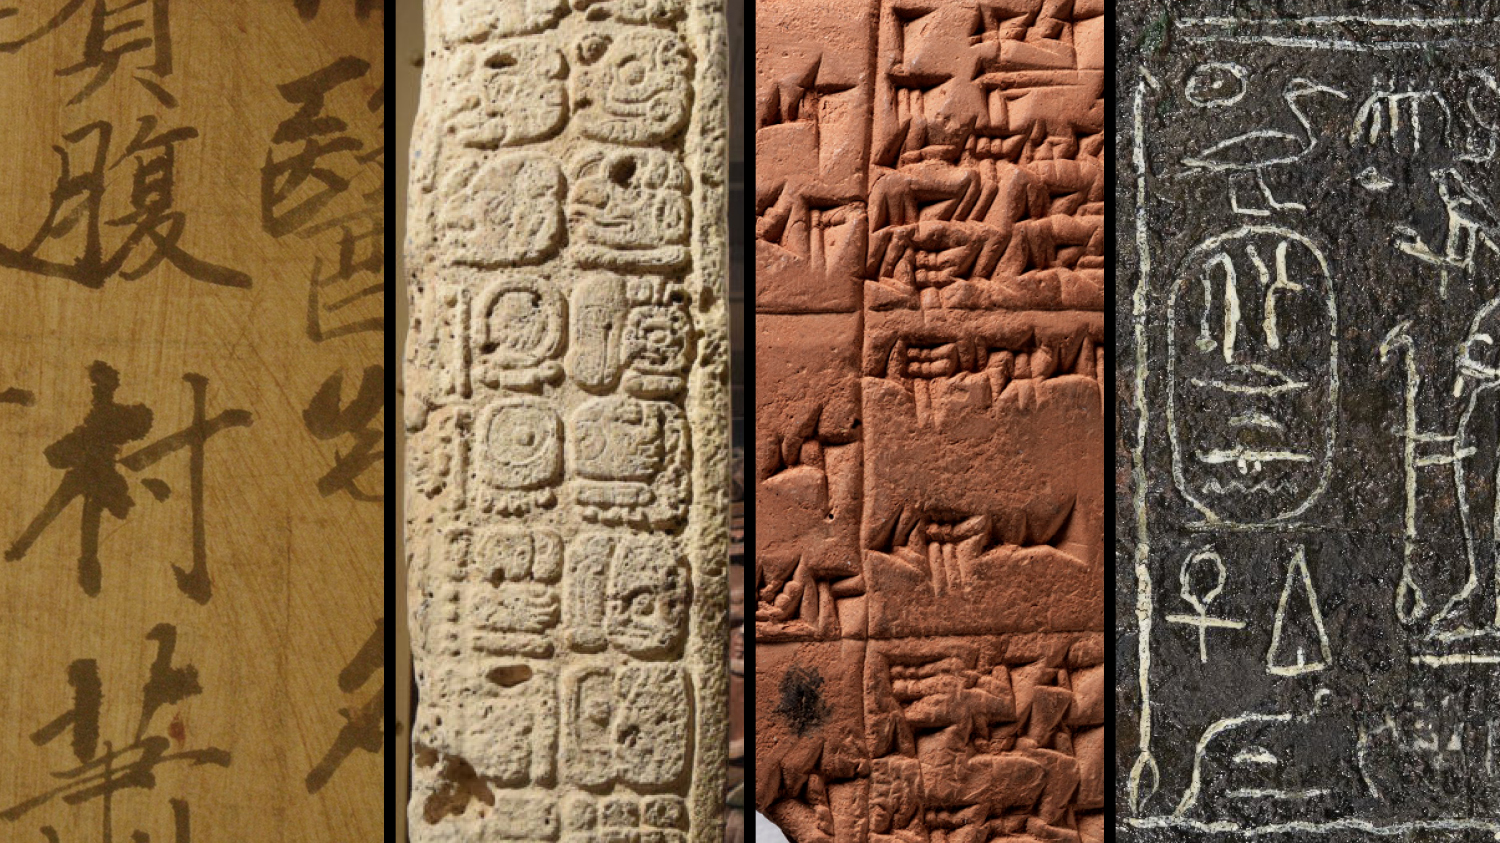 Four images of ancient writing, put next to each other